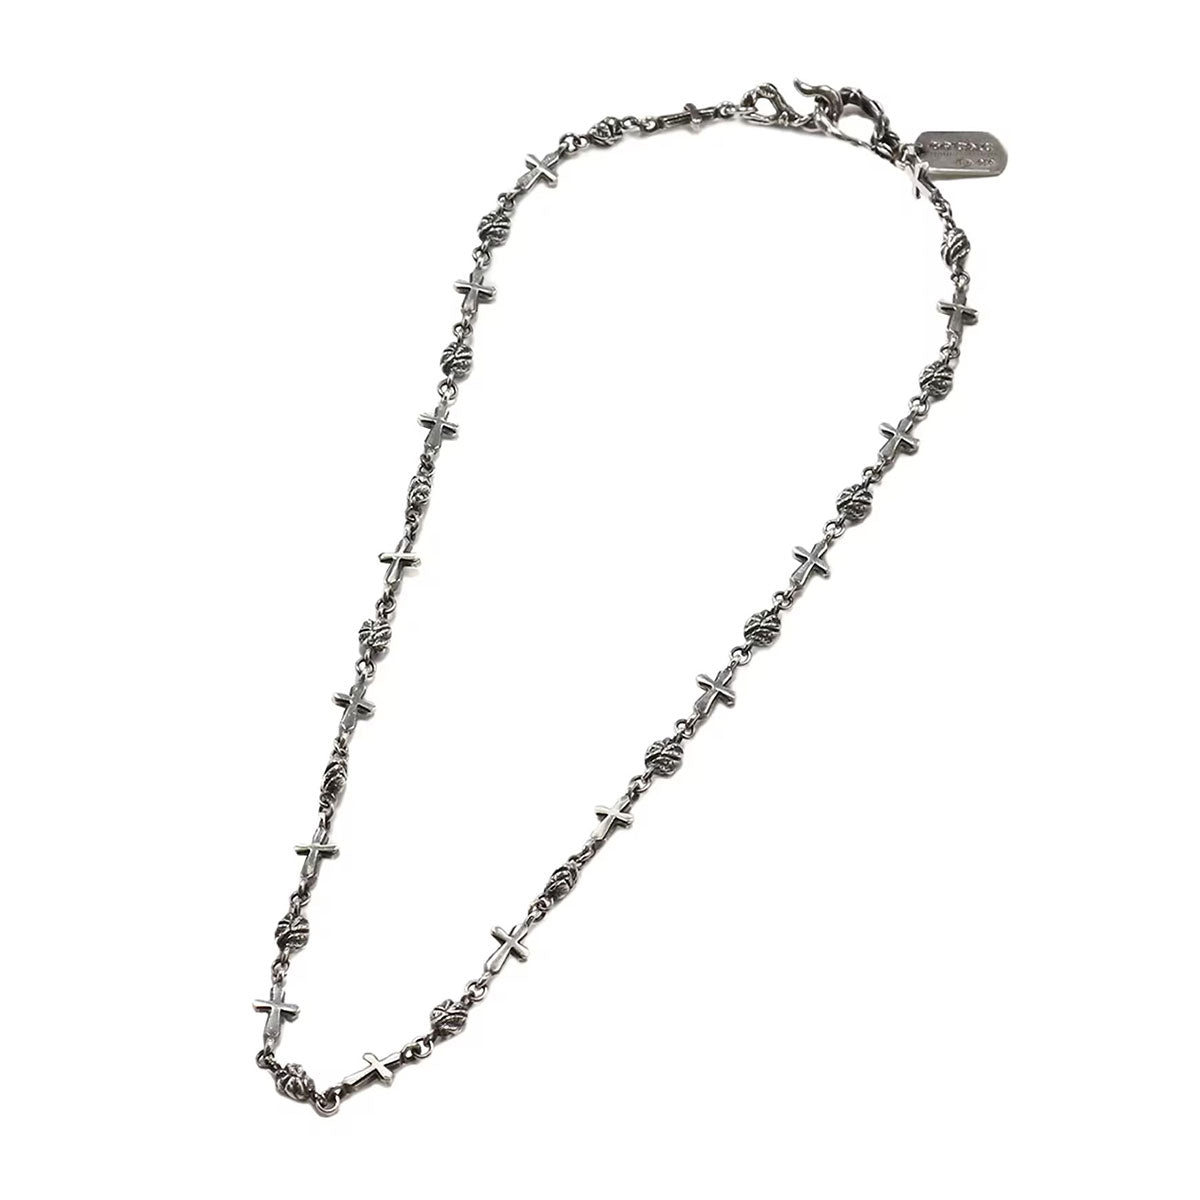 SILVER 950 GOTHIC CROSS CHAIN NECKLACE | Why are you here?